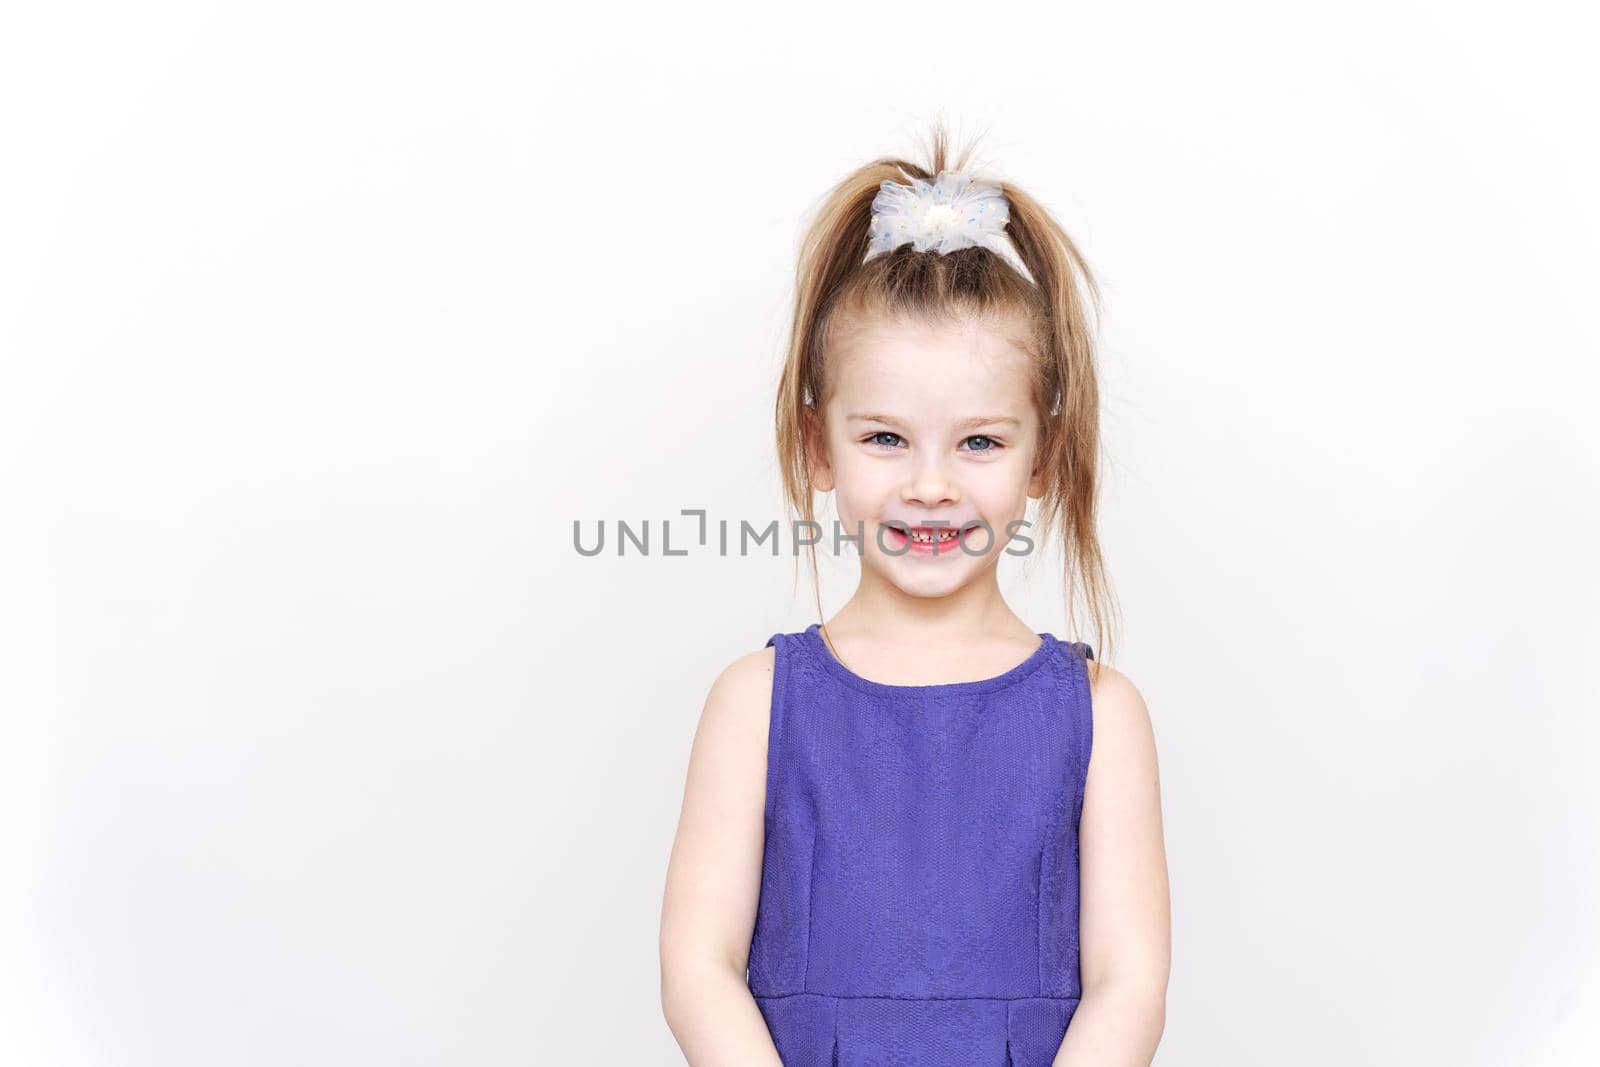 portrait of a cute 5 year old girl on a light background by Lena_Ogurtsova